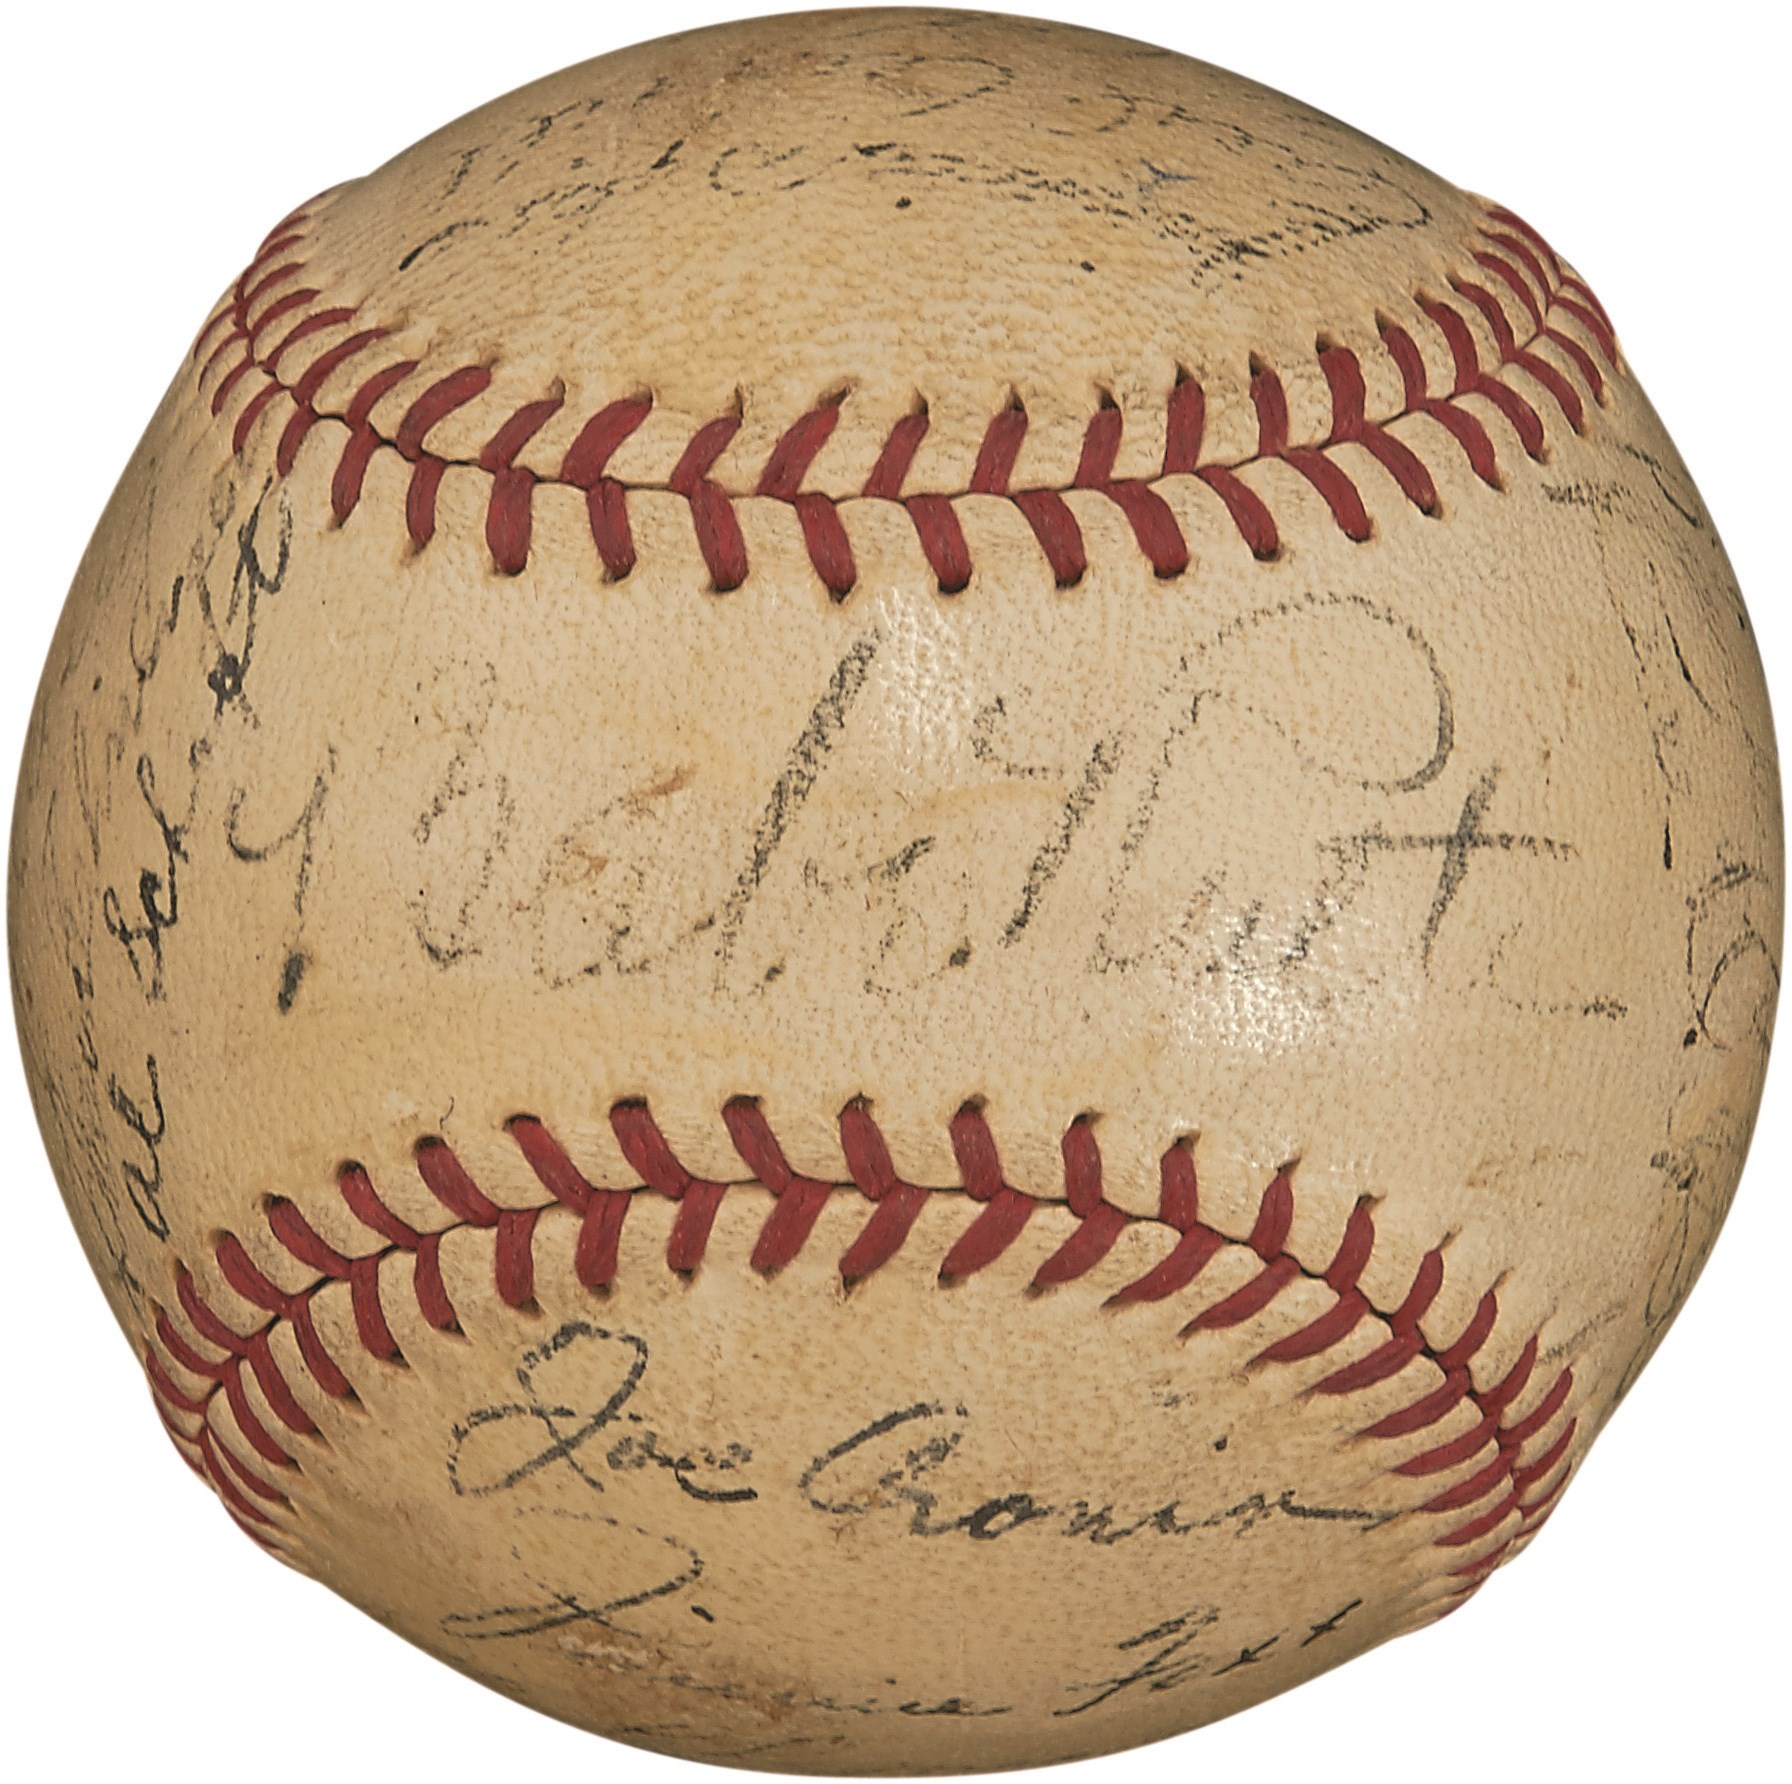 1934 American League All-Star Team-Signed Baseball with Ruth and Gehrig (PSA)